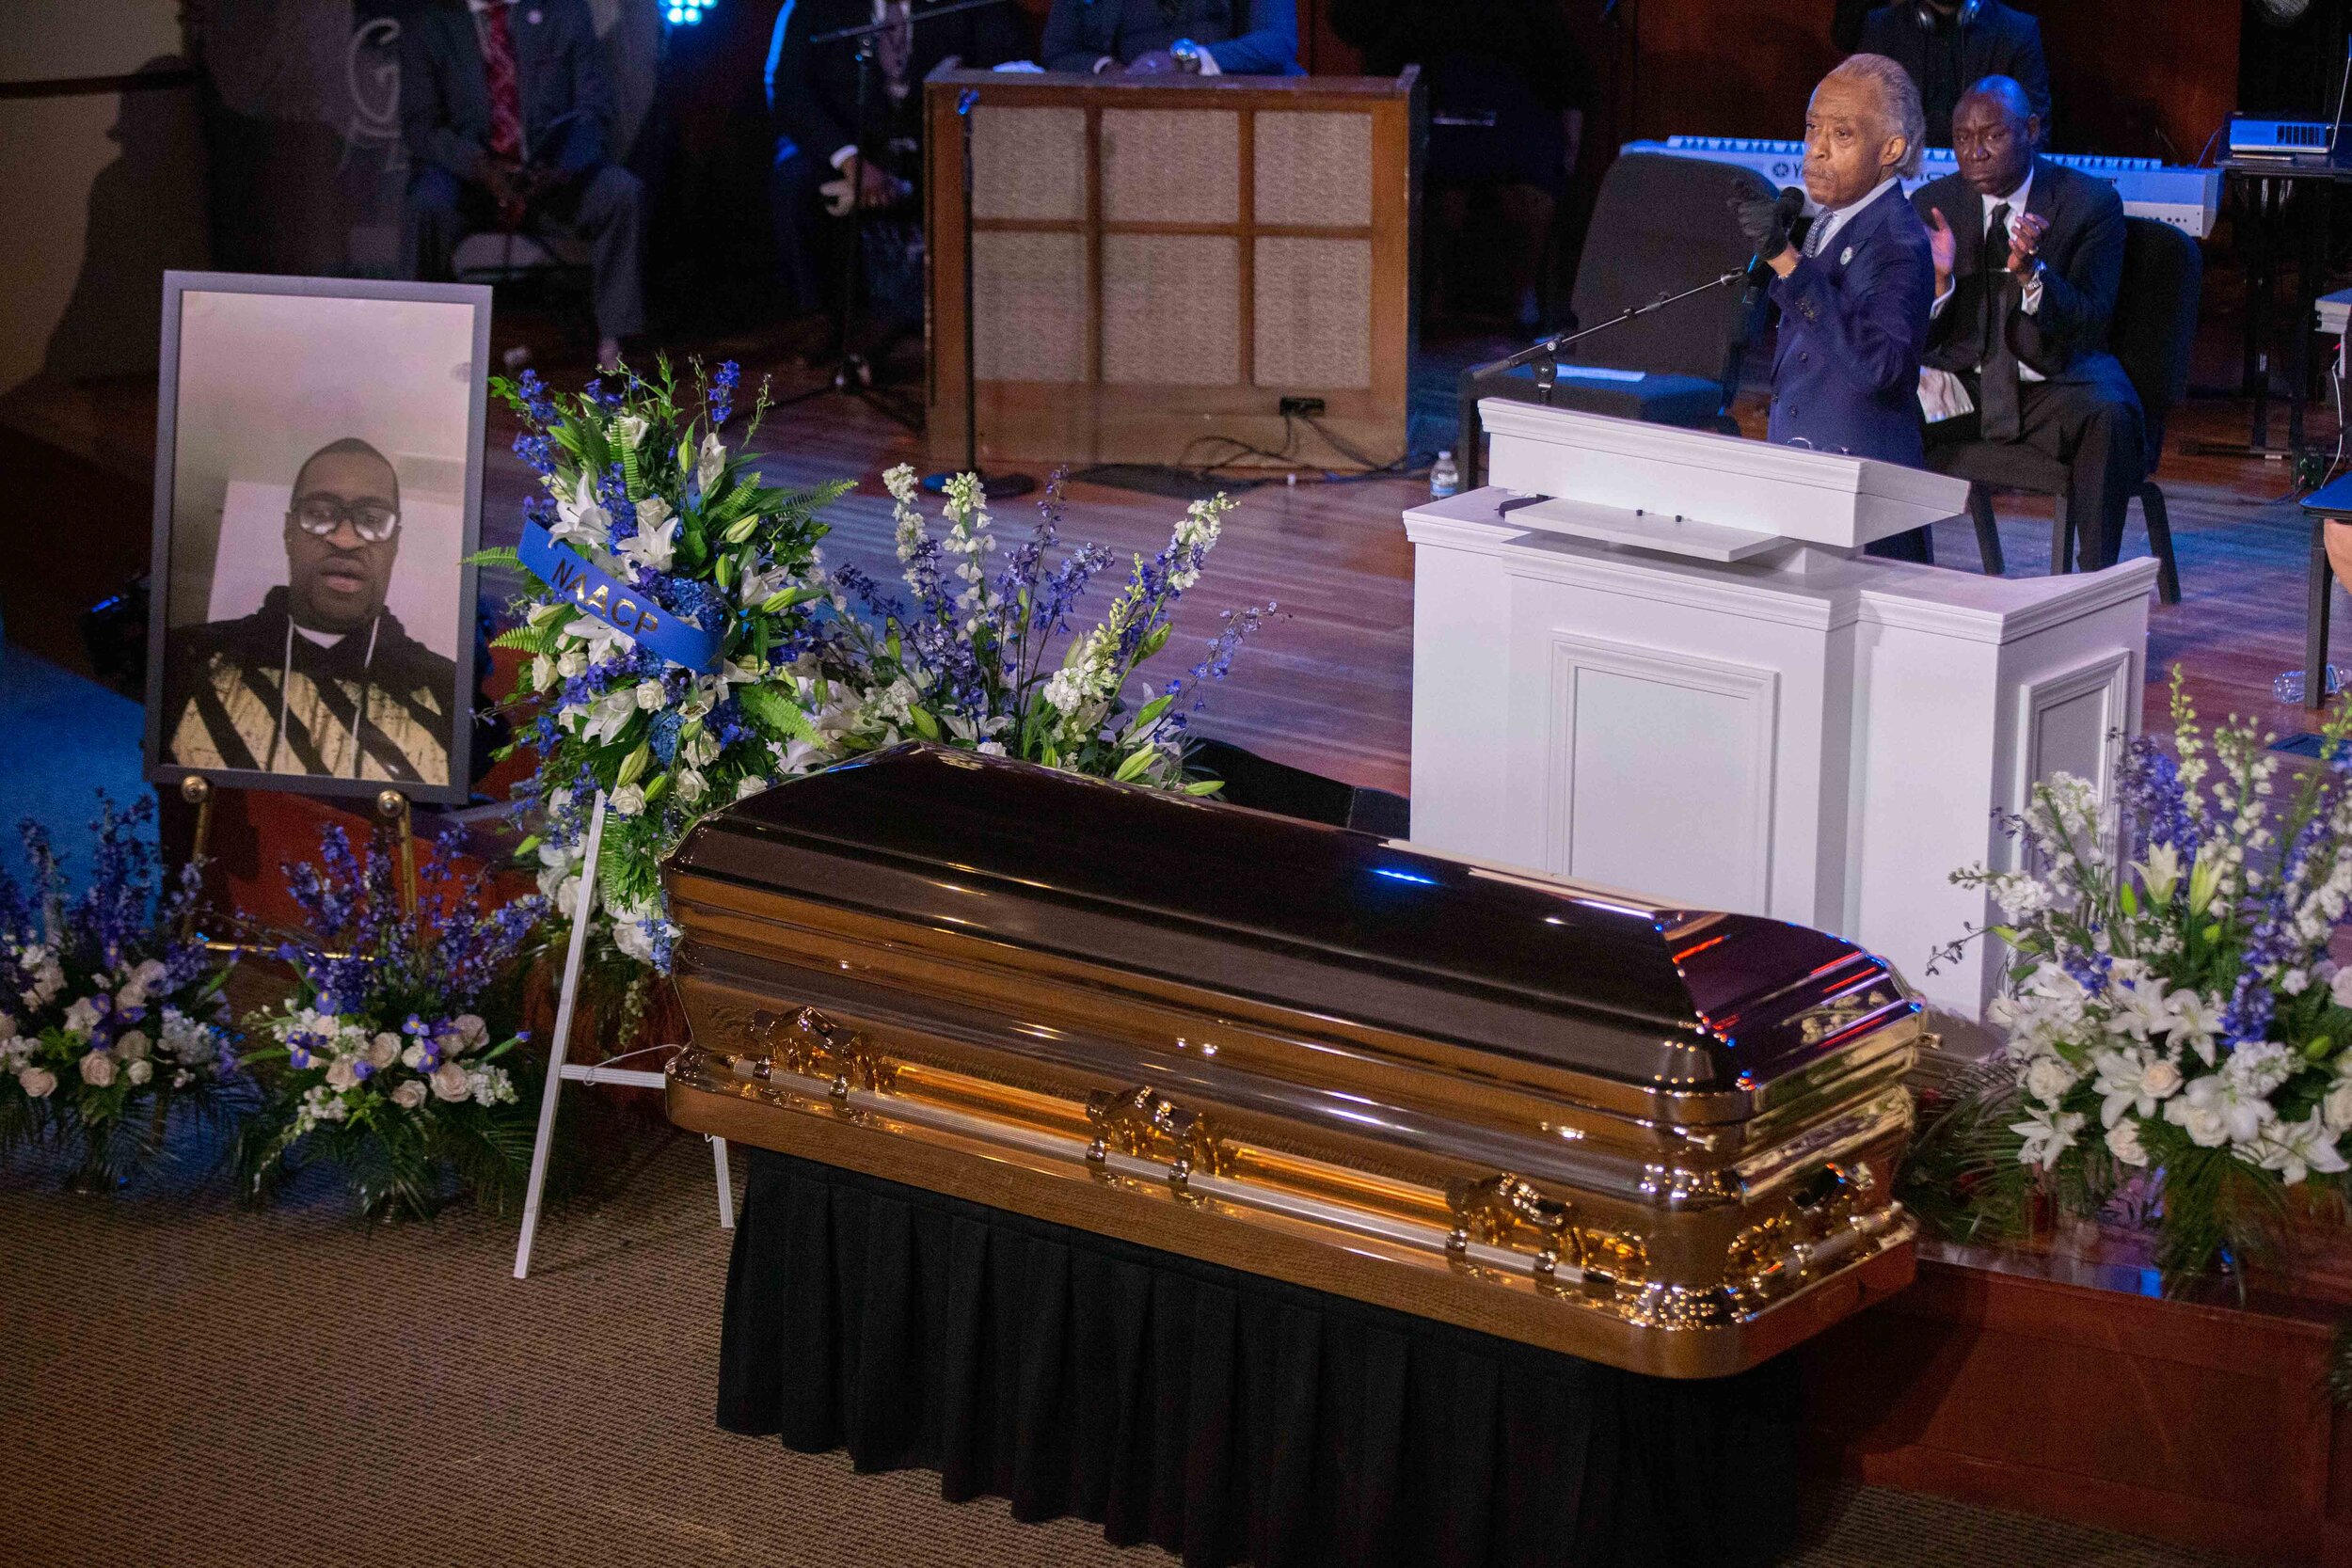  Rev. Al Sharpton gives a eulogy for George Floyd at his memorial at North Central University in Minneapolis, Minnesota on Jun 4, 2020. 